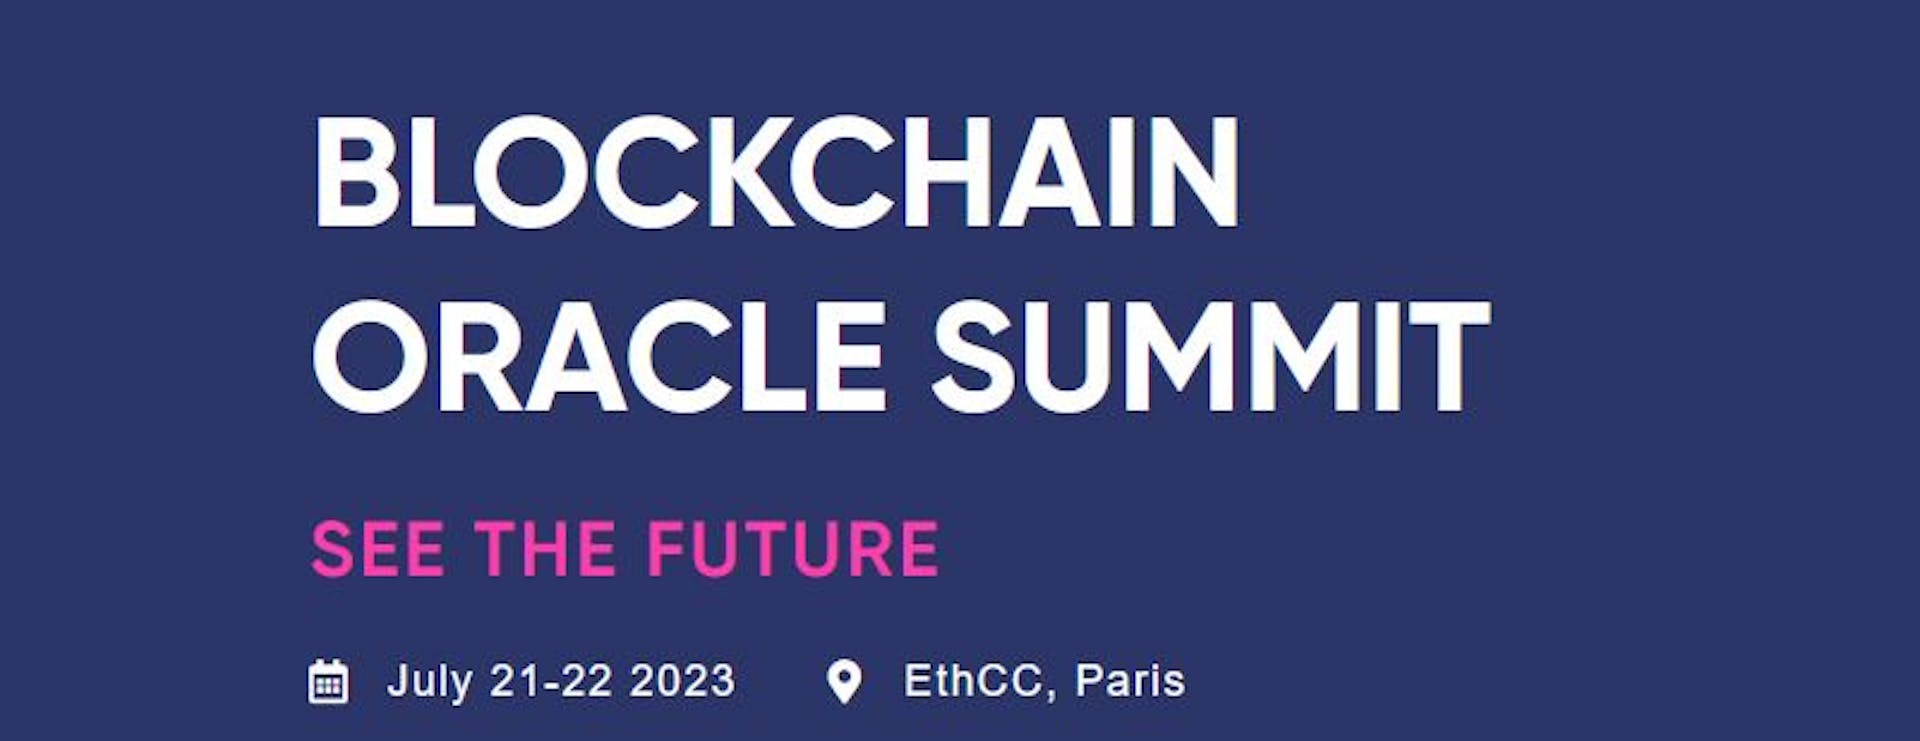 featured image - Blockchain Oracle Innovations & the 2023 Blockchain Oracle Summit (Part 2)